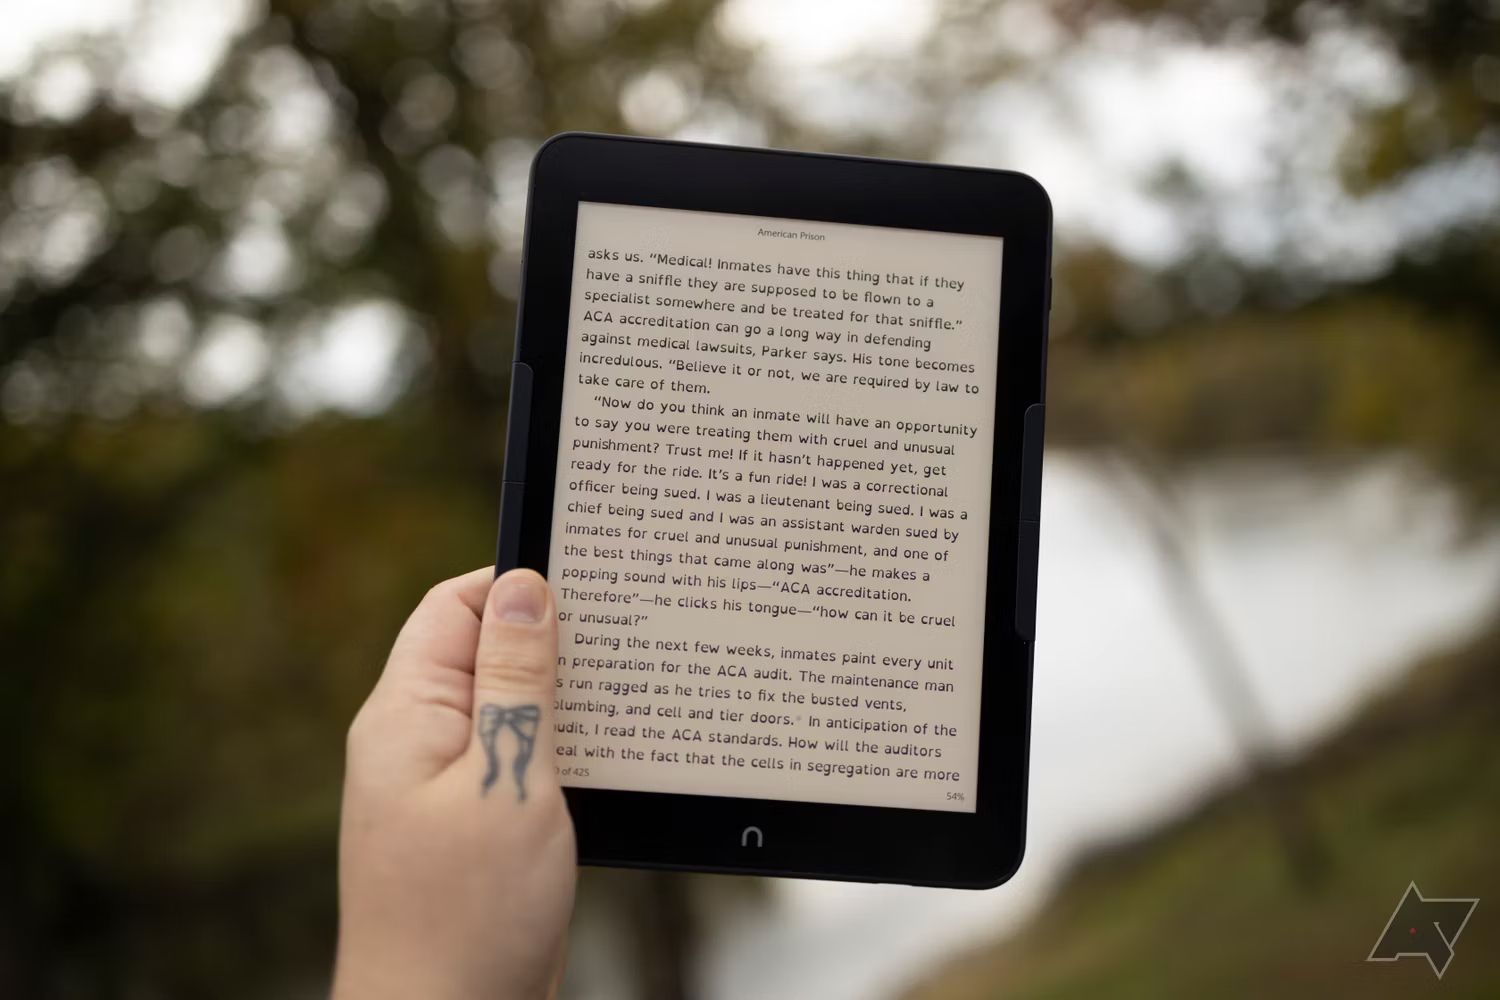 Nook Glowlight 4 Plus review held in hand outside showing screen with text